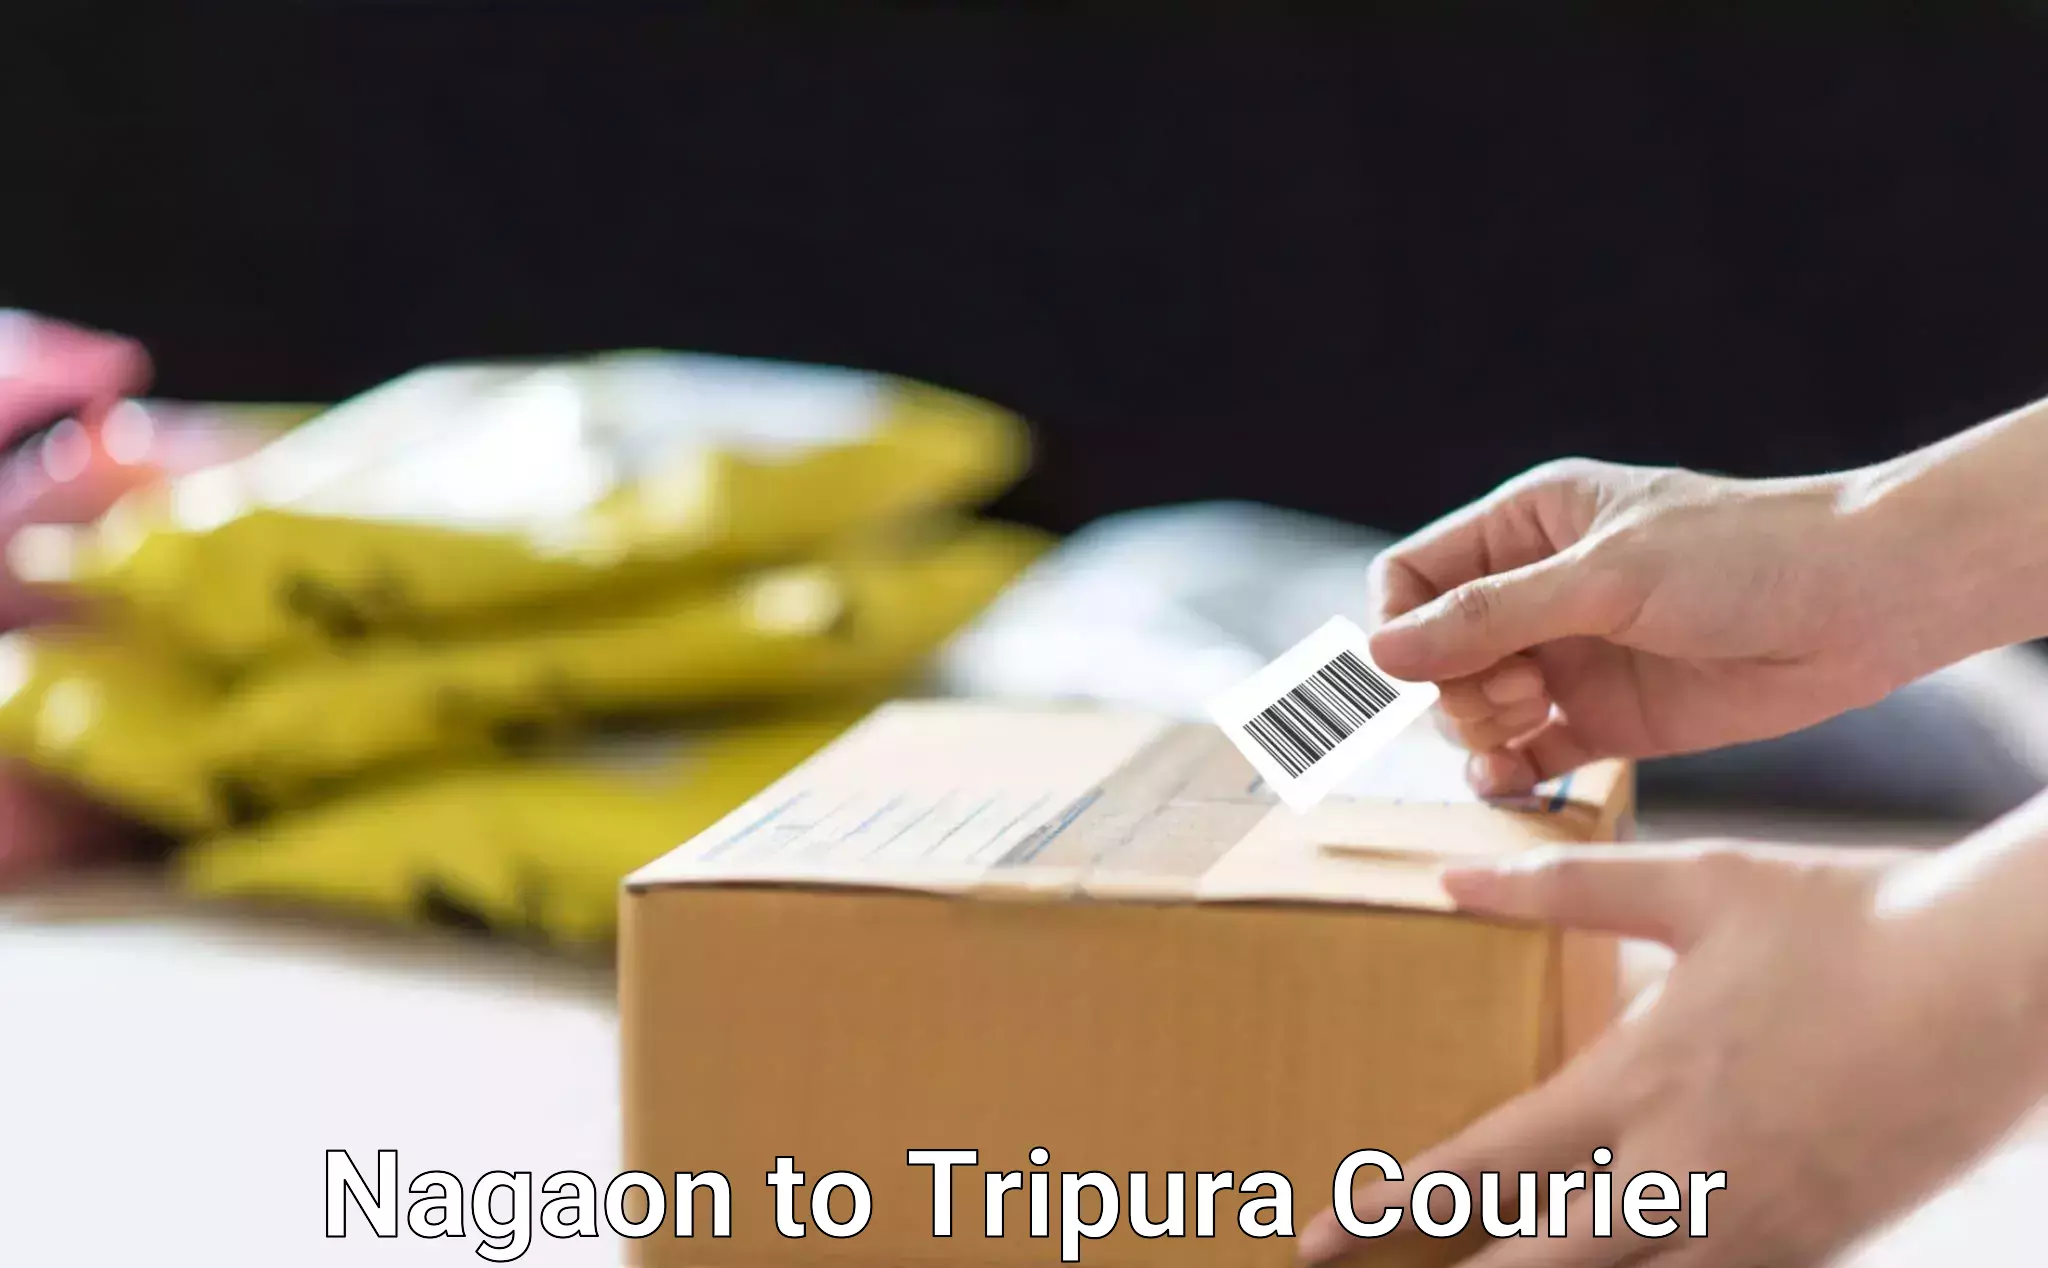 Sustainable courier practices Nagaon to Udaipur Tripura